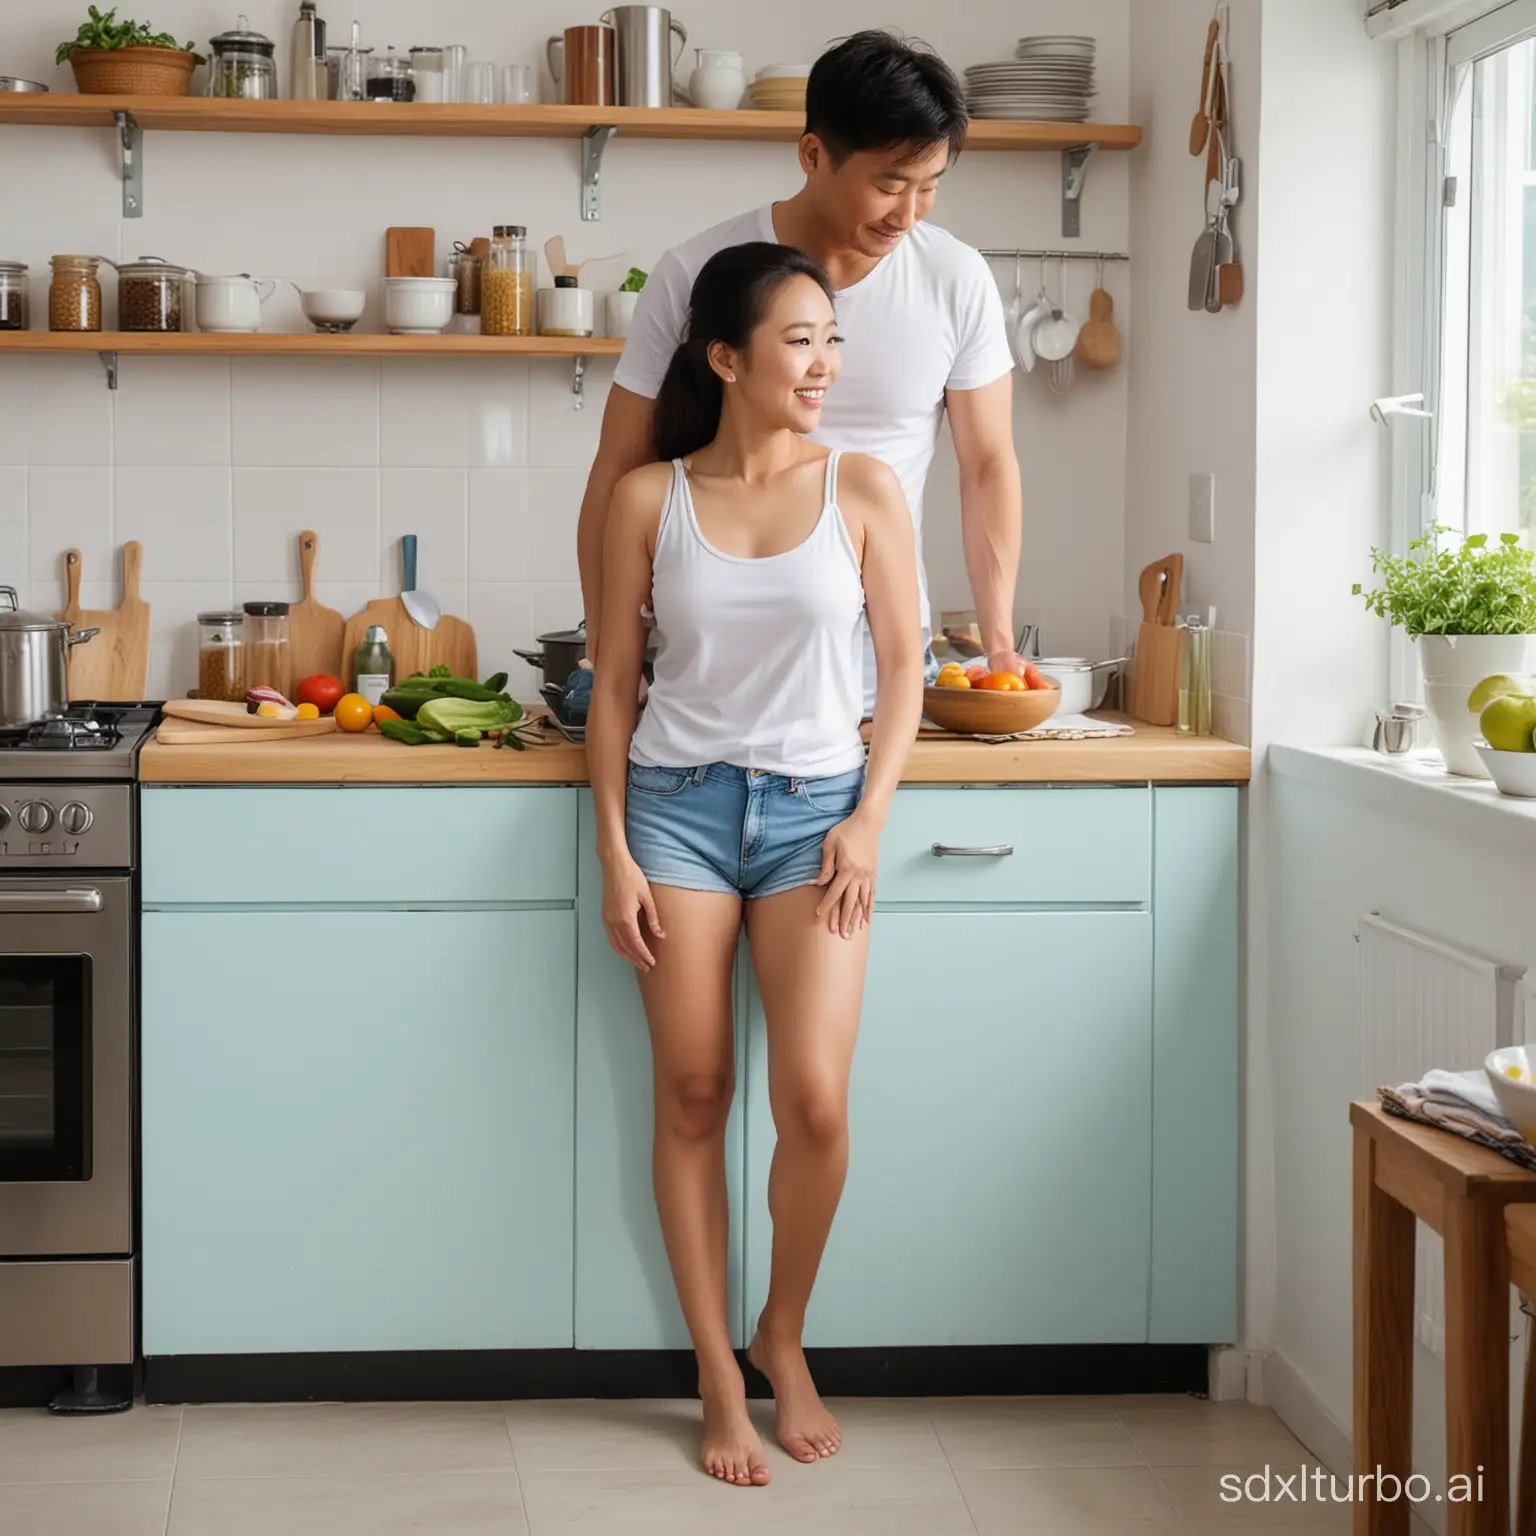 A 32-year-old voluptuous Chinese beautiful woman, wearing light blue denim shorts, a white tank top, barefoot, embracing her 54-year-old boyfriend in the kitchen, cooking together.